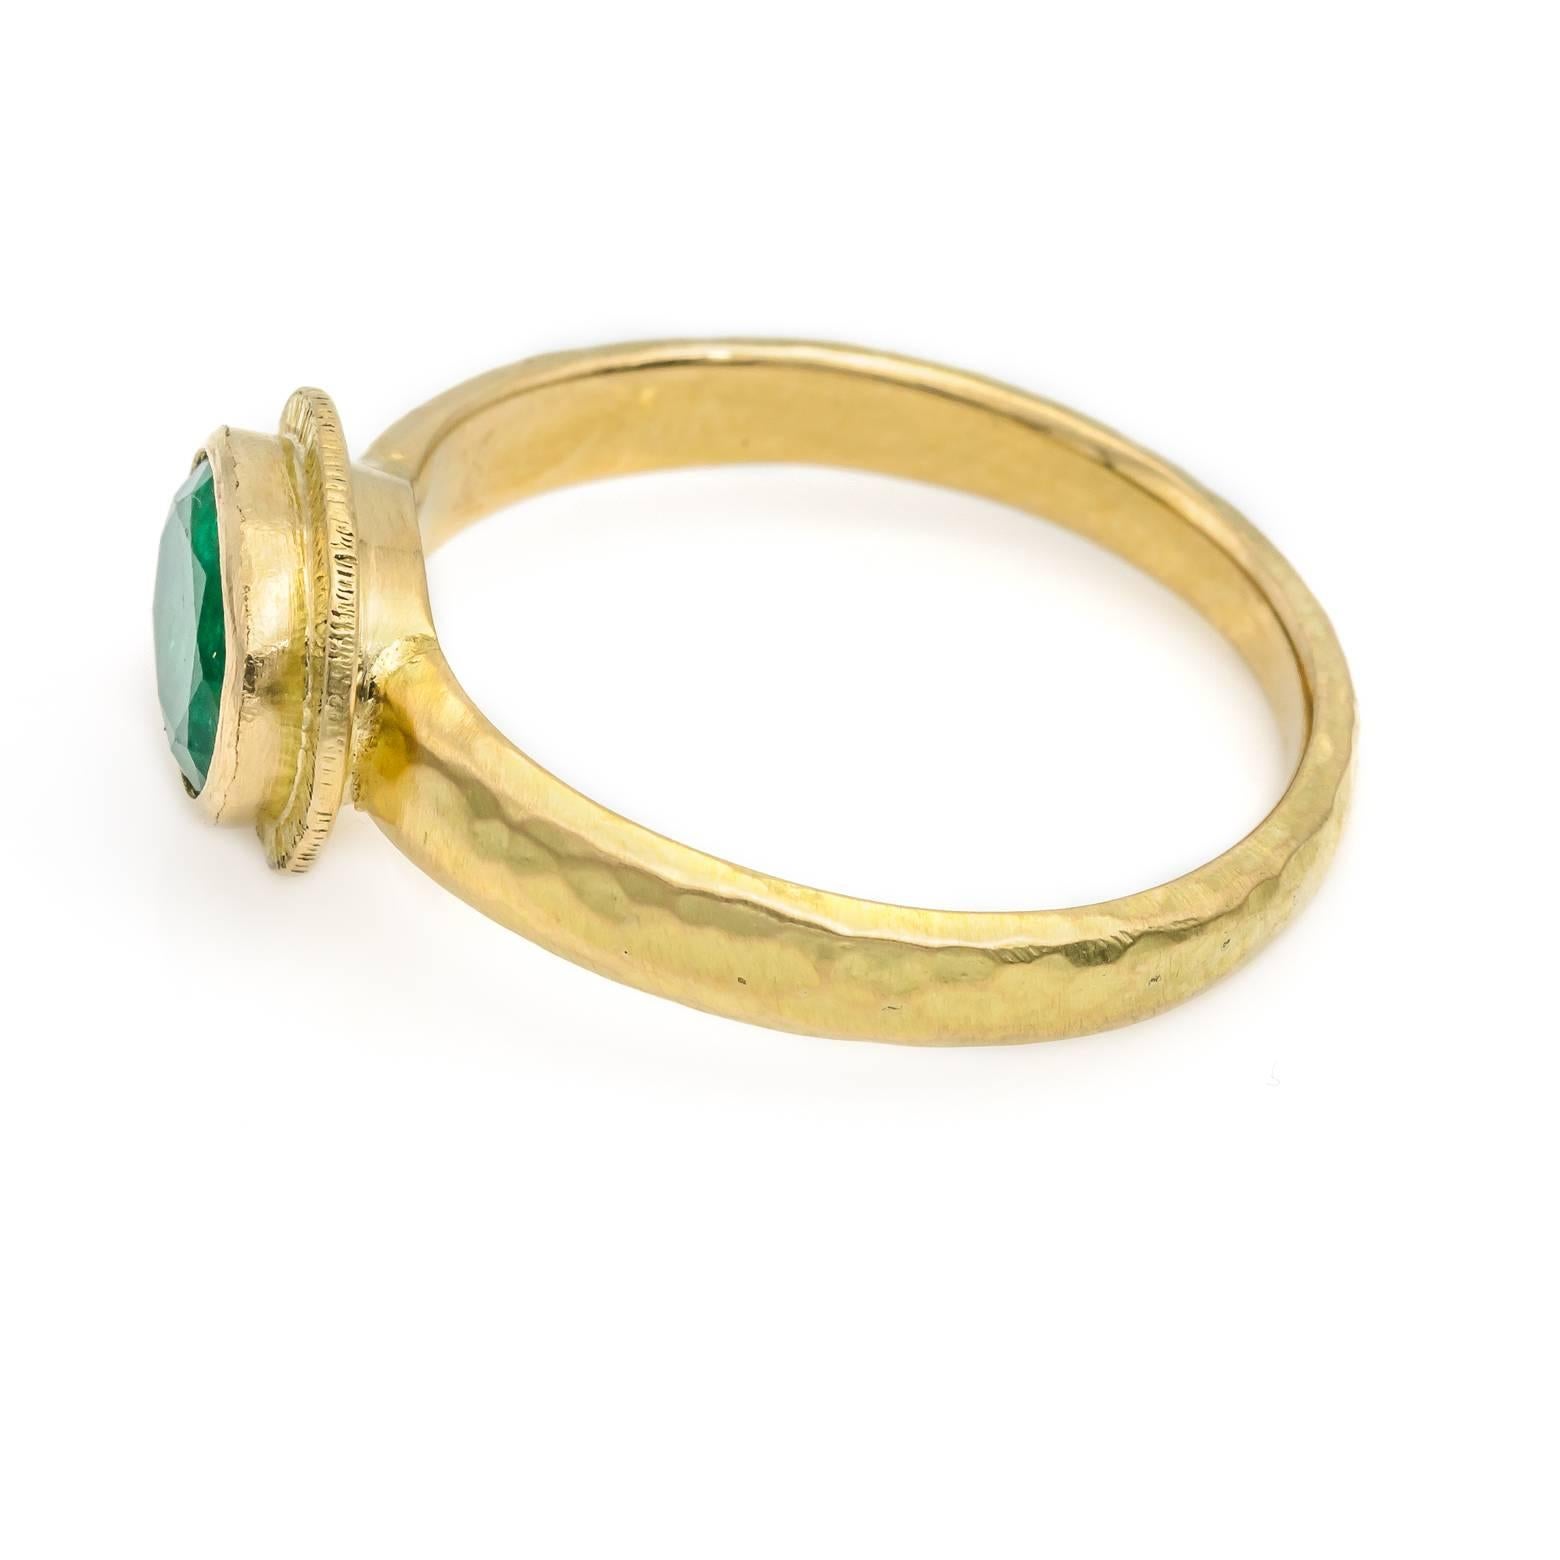 Oval Cut Oval Emerald Ring in 18 Karat Yellow Gold, Hammered and Textured, 0.90 Carat